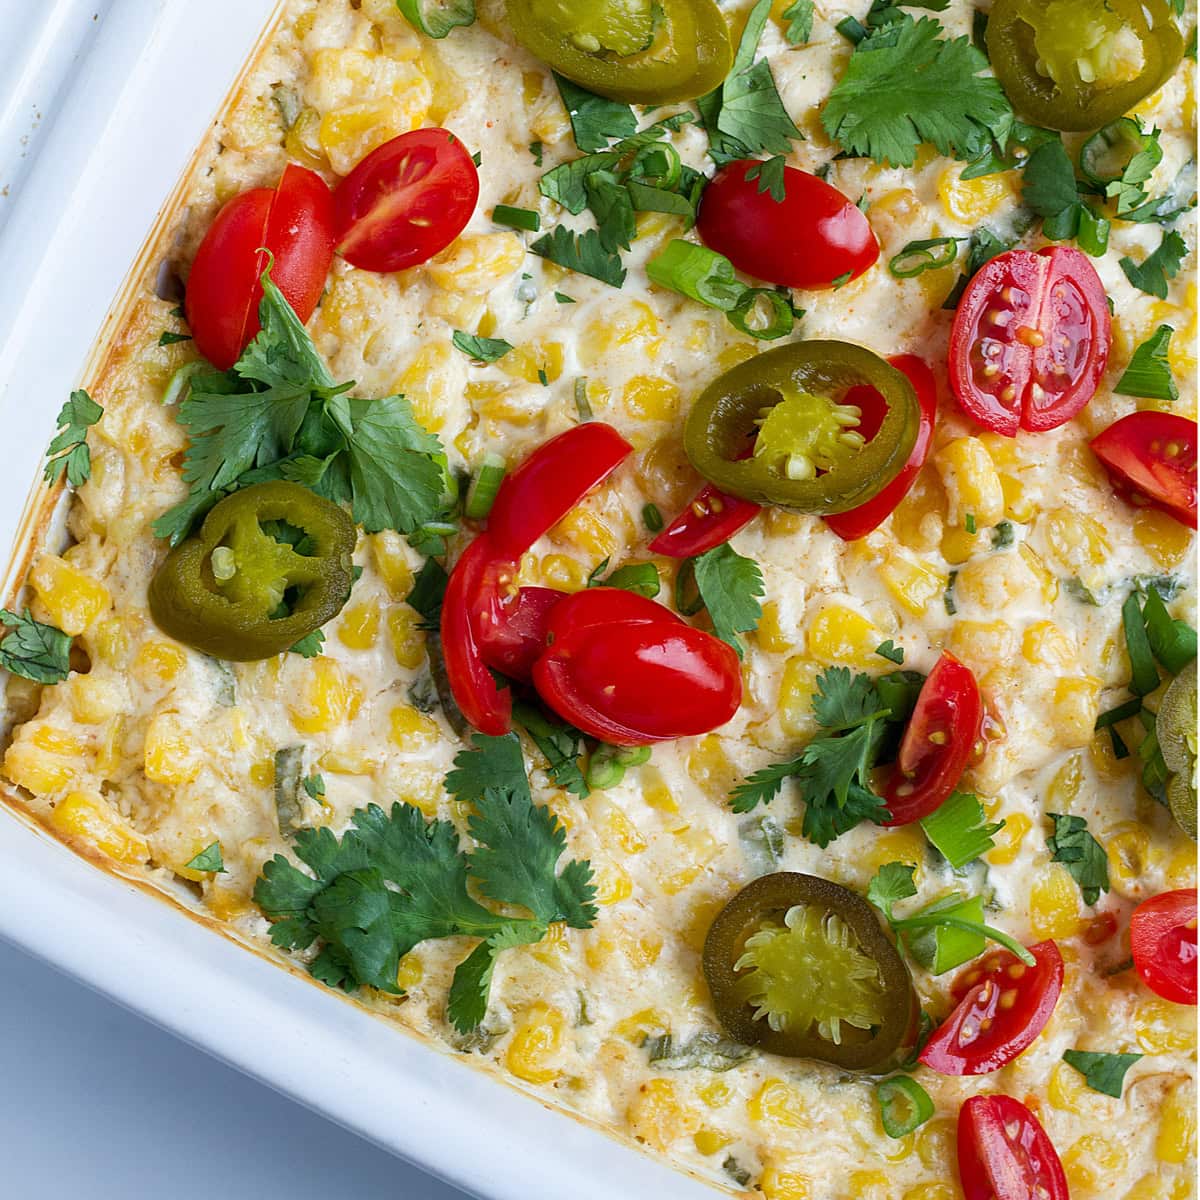 Baked cream cheese corn dip topped with cilantro, jalapeno and cocktail tomatoes.